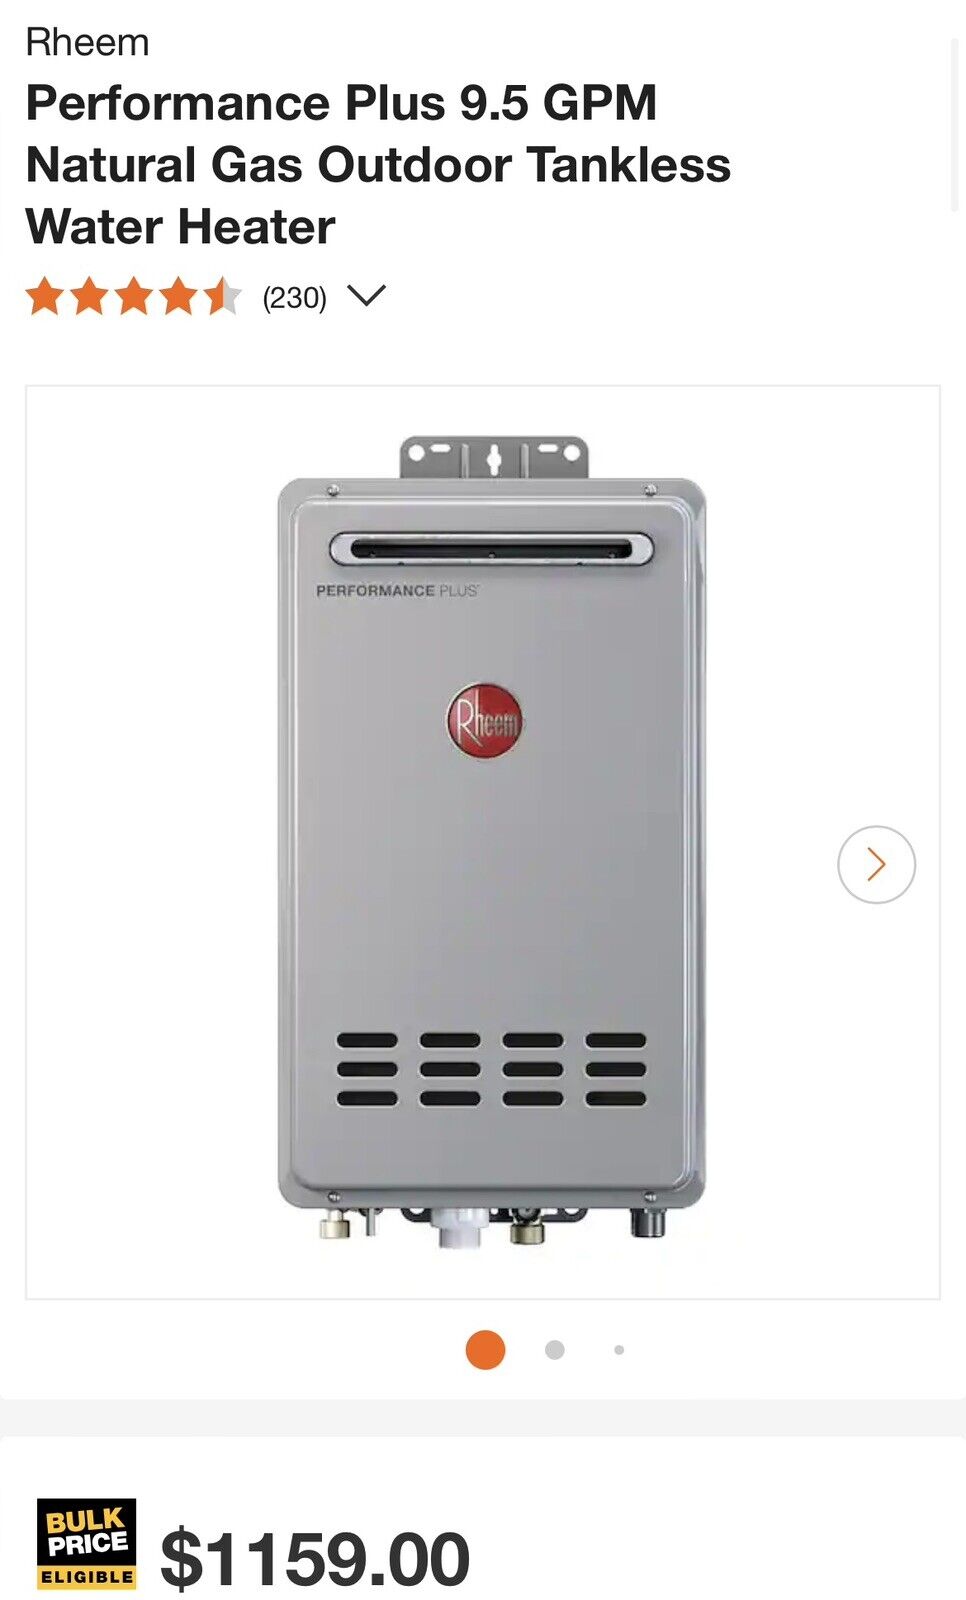 Rheem Performance Plus 9.5 GPM Natural Gas Outdoor Tankless Water Heater 